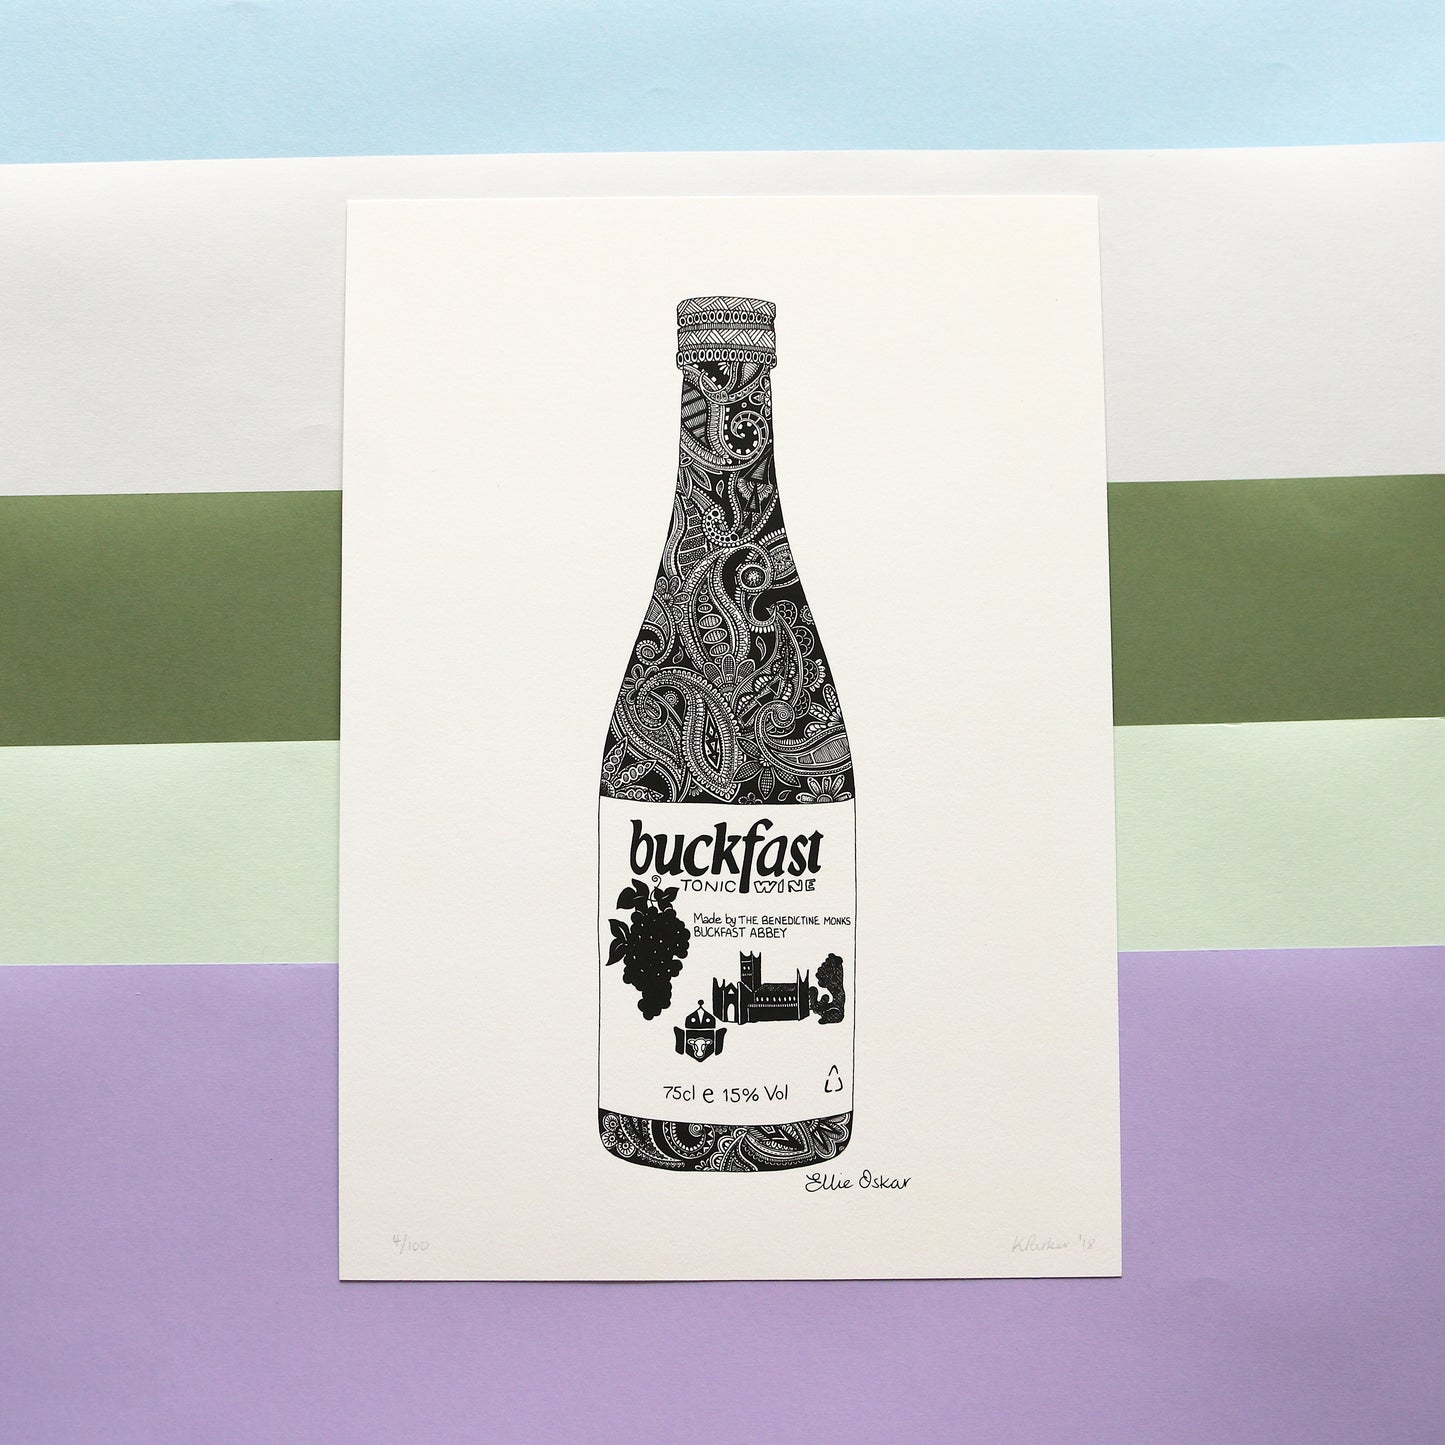 SALE - A5 Buckfast Print - **Old Branding & Discontinued Size** - 5 available